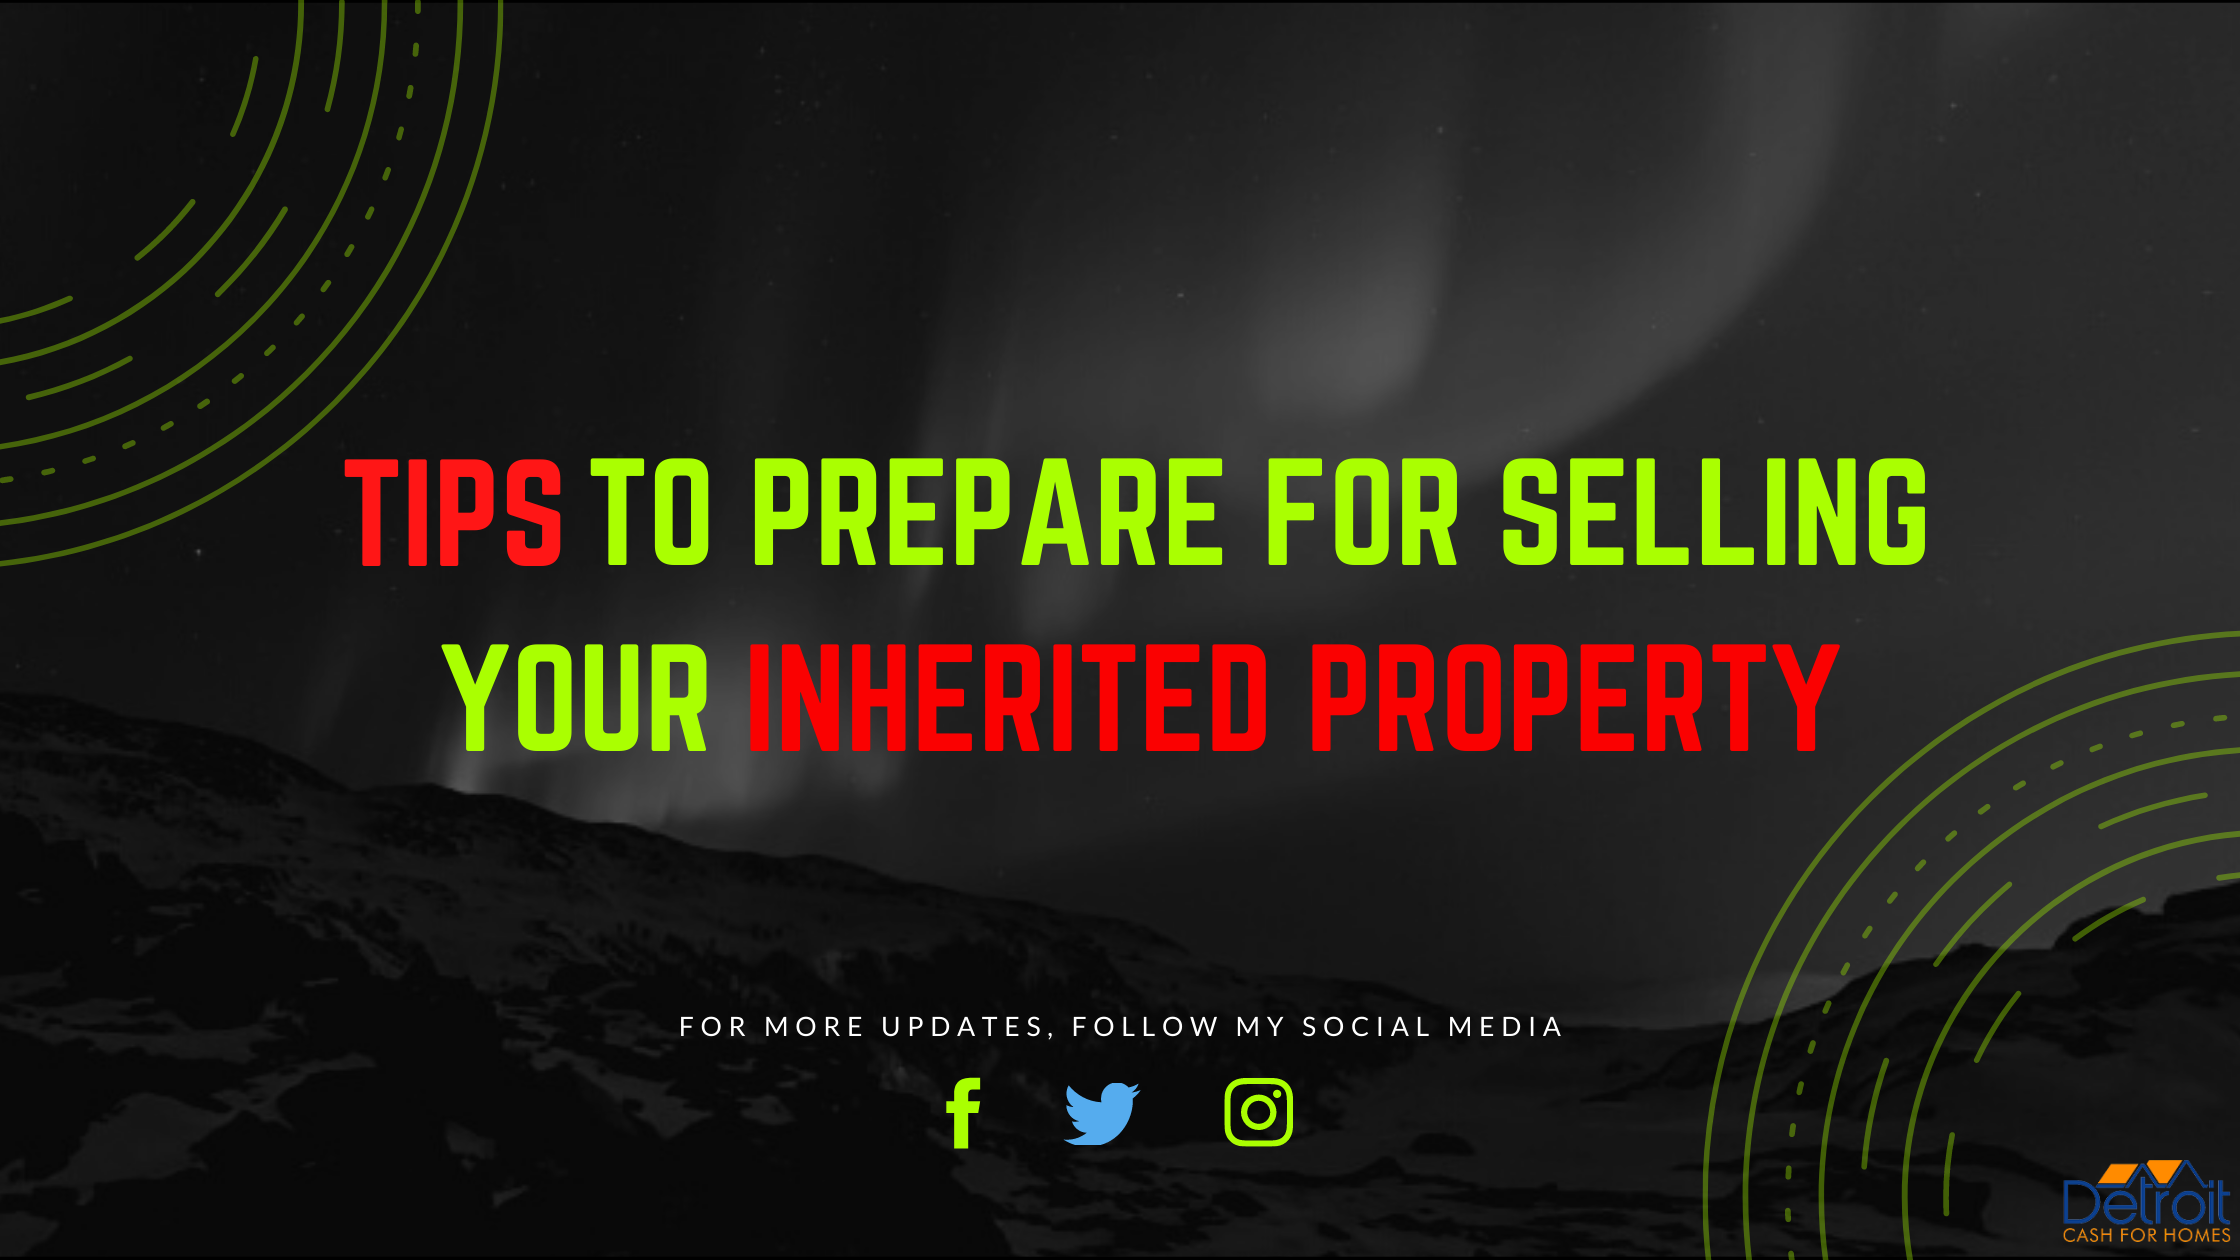 Tips To Prepare For Selling Your Inherited Property